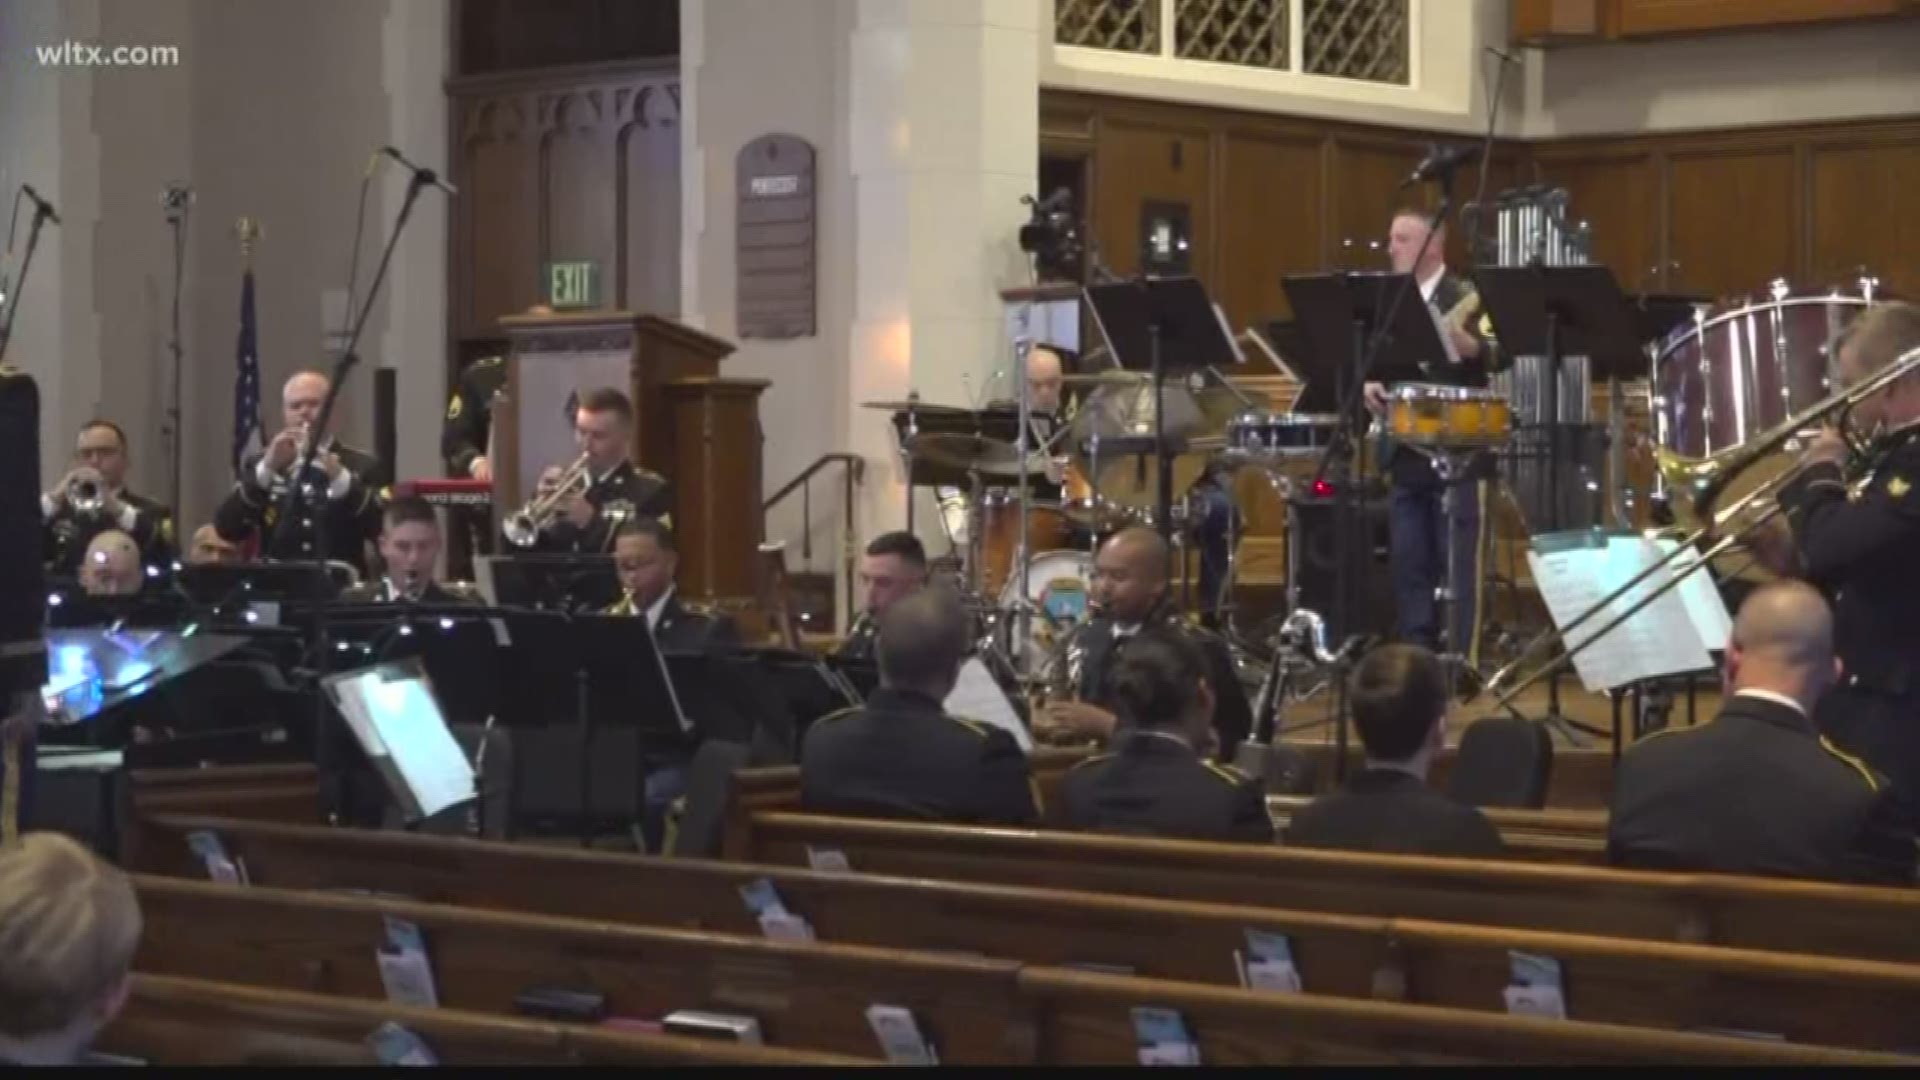 Fort Jackson and the 282nd Army band preformed a musical tribute at Shandon United Methodist Church to thank those who serve